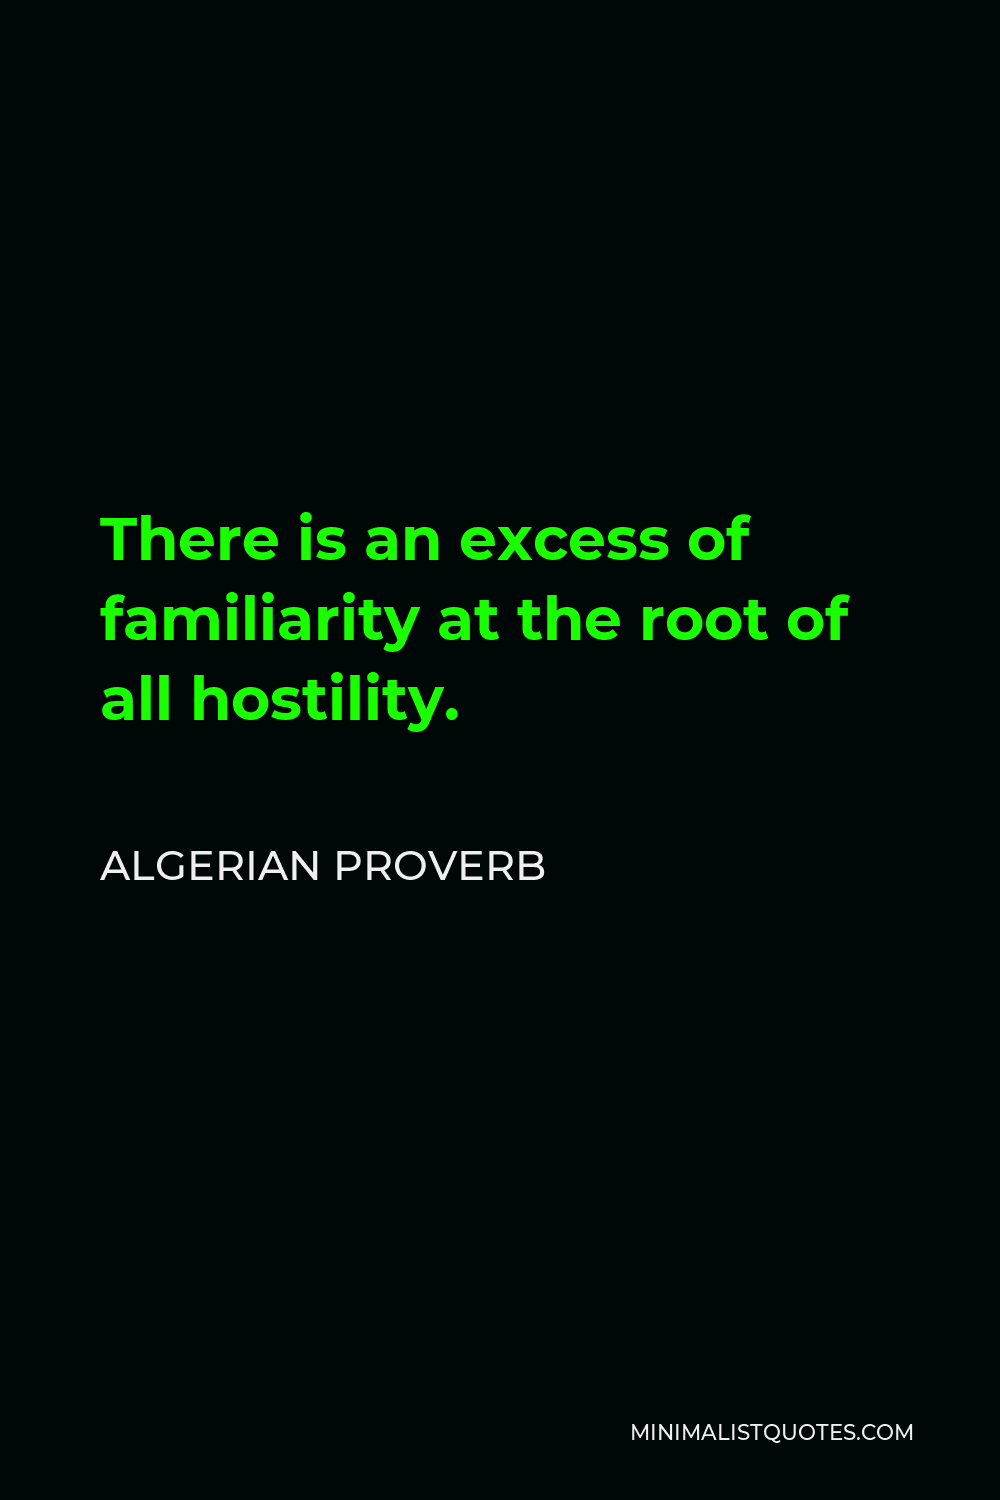 Algerian Proverb Quote - There is an excess of familiarity at the root of all hostility.